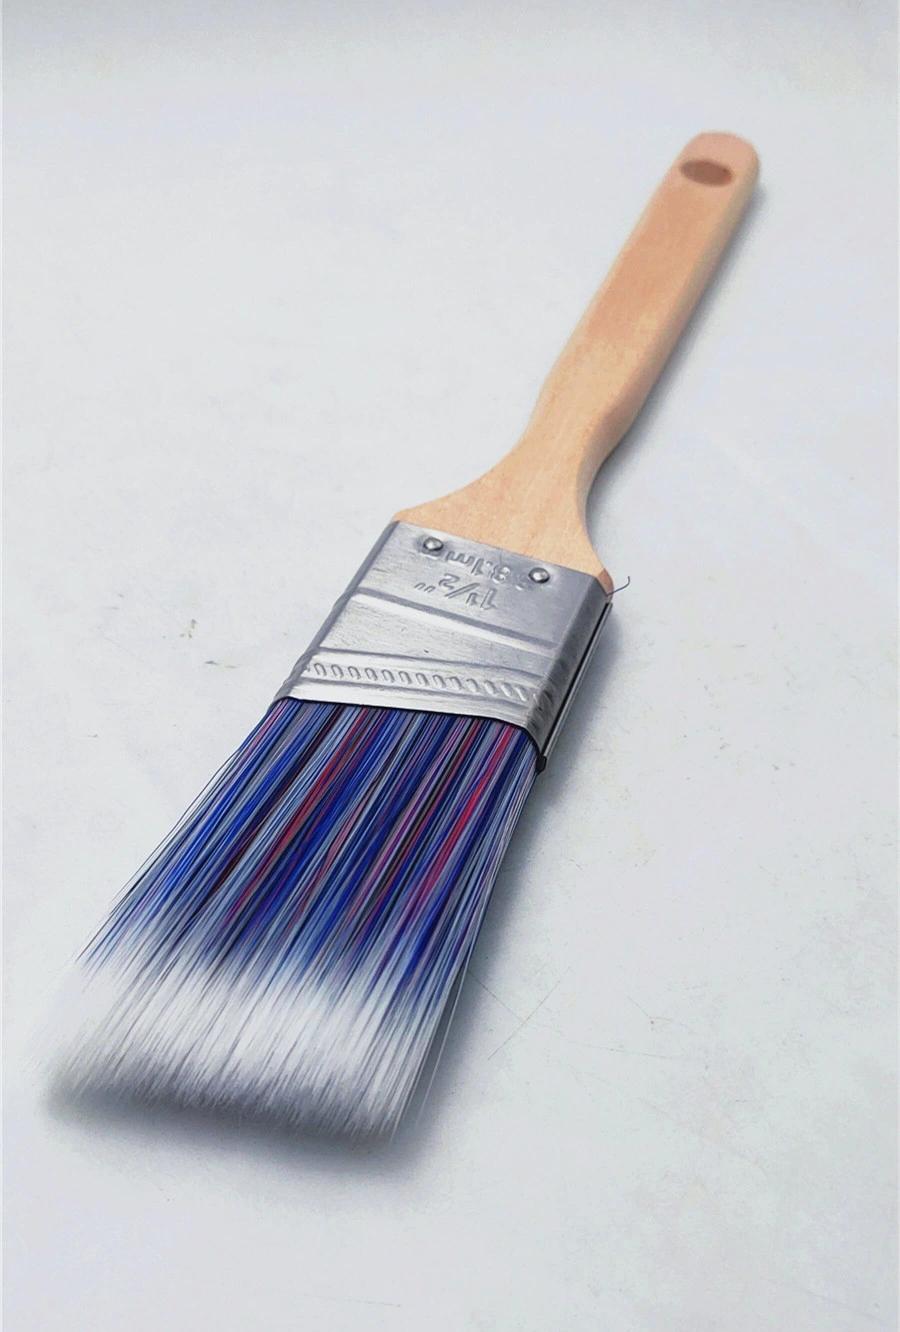 Traditional Offroad Popular Wooden Handle Paint Brush